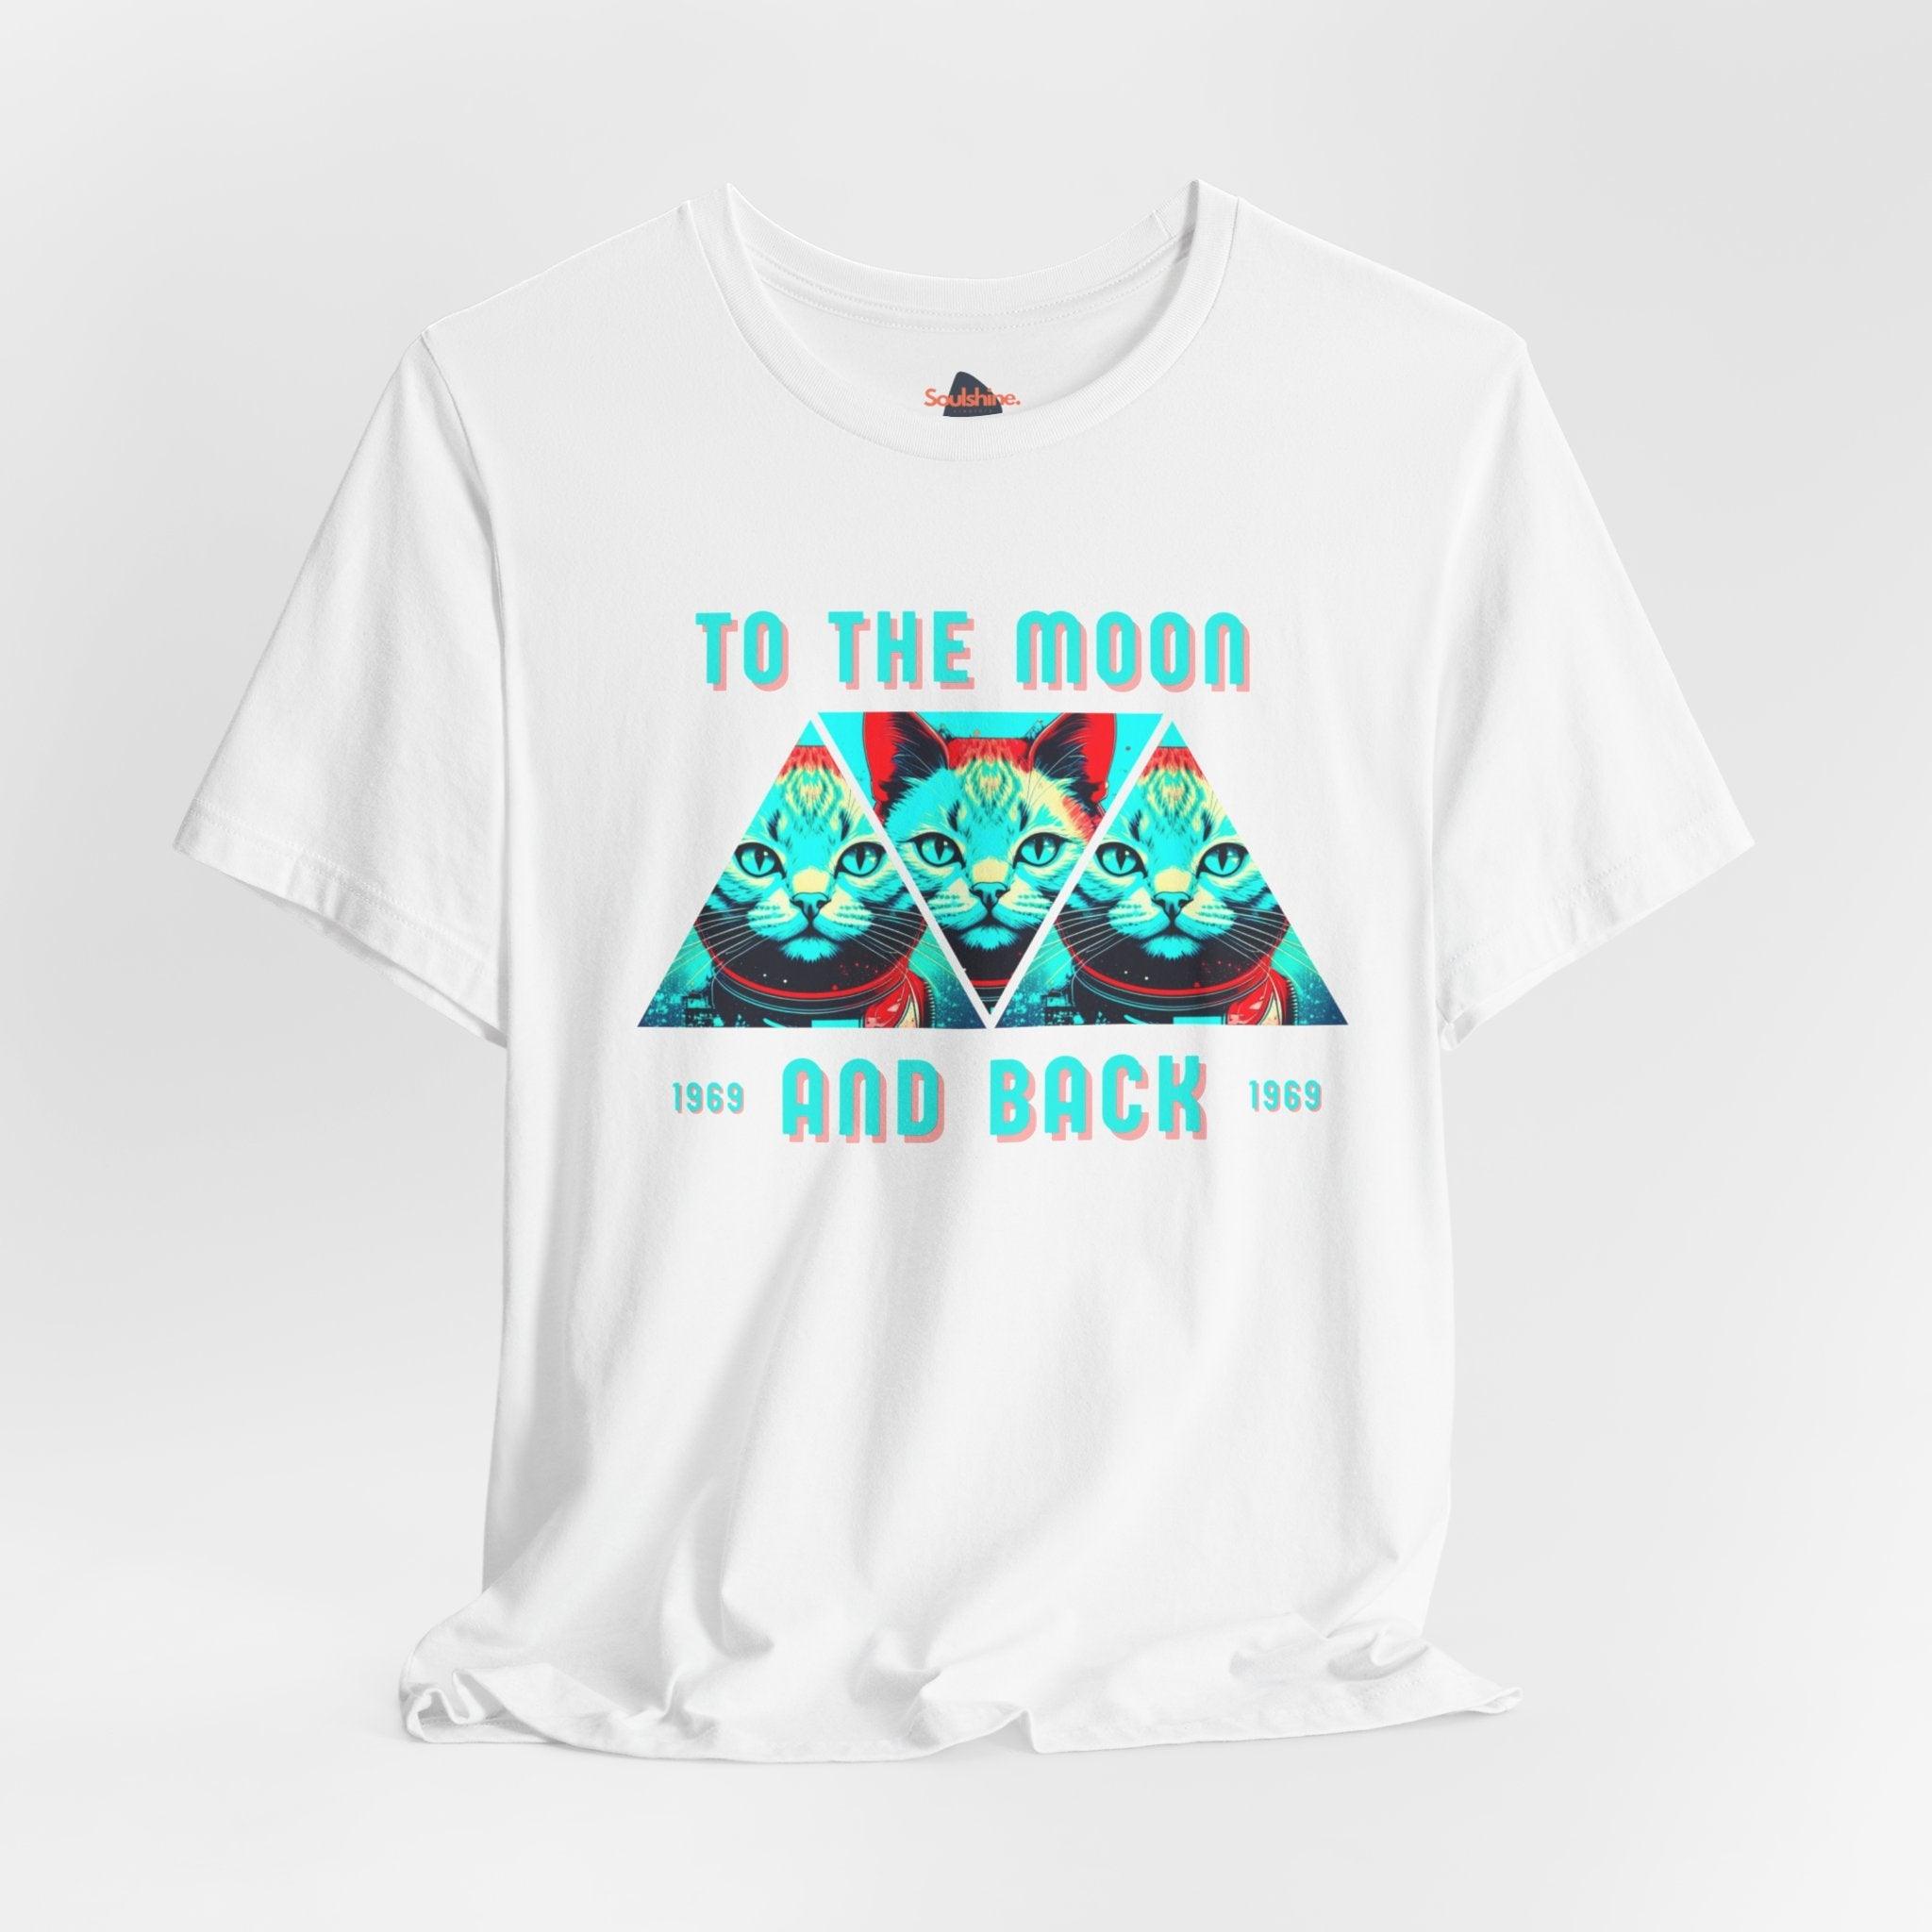 To the moon and back - Soulshinecreators - Unisex Jersey Short Sleeve Tee - US White S T-Shirt by Soulshinecreators | Soulshinecreators